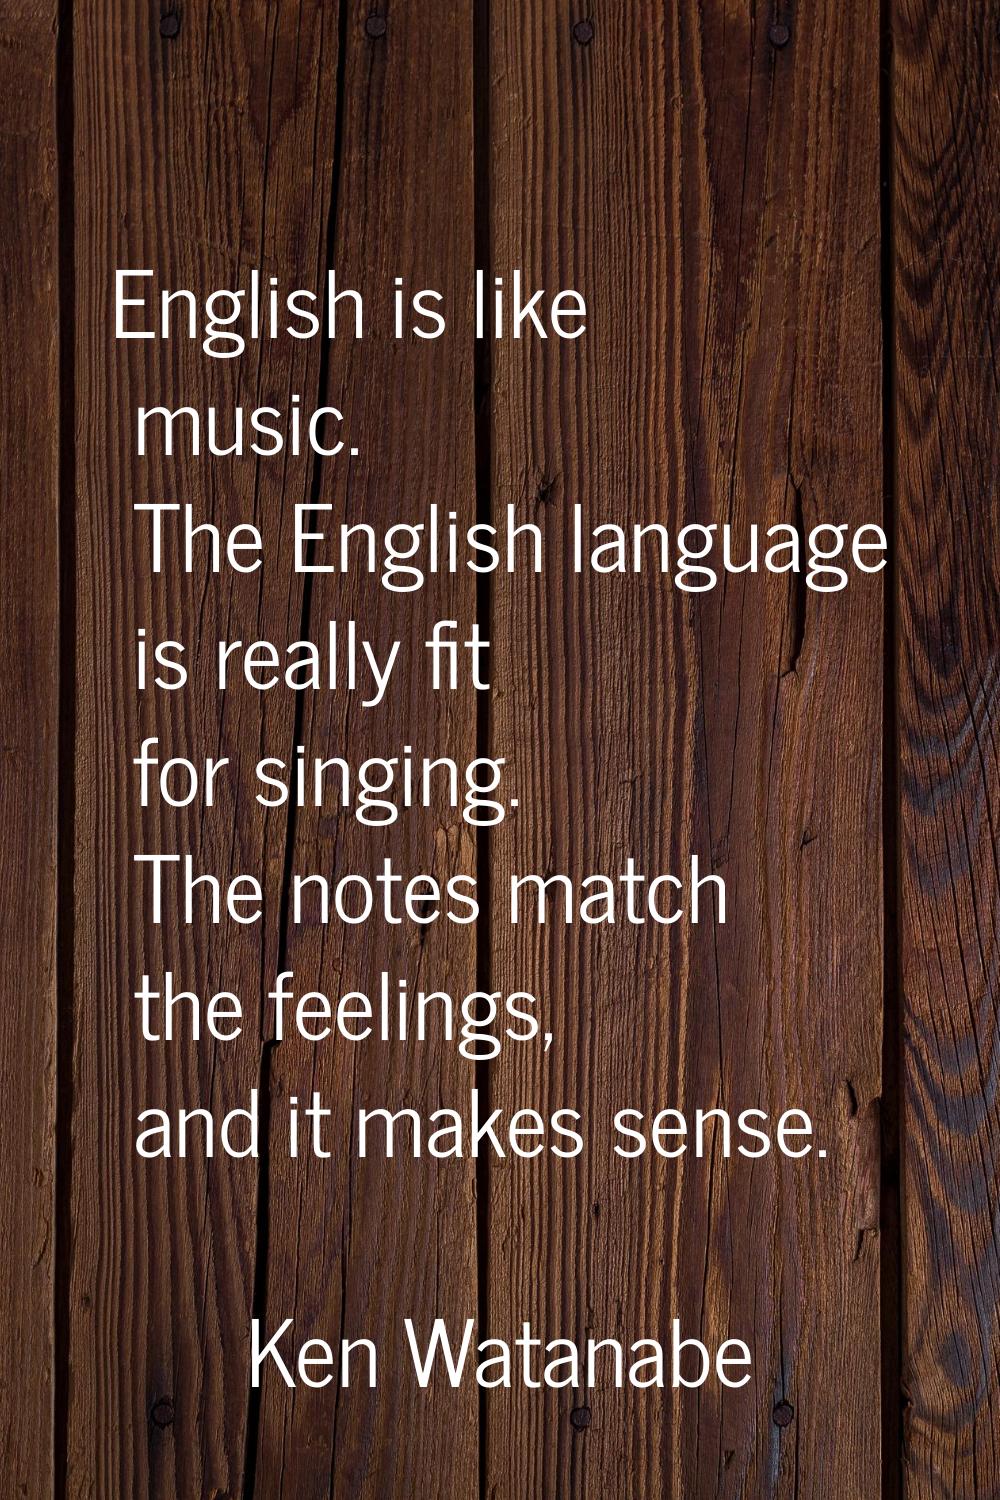 English is like music. The English language is really fit for singing. The notes match the feelings